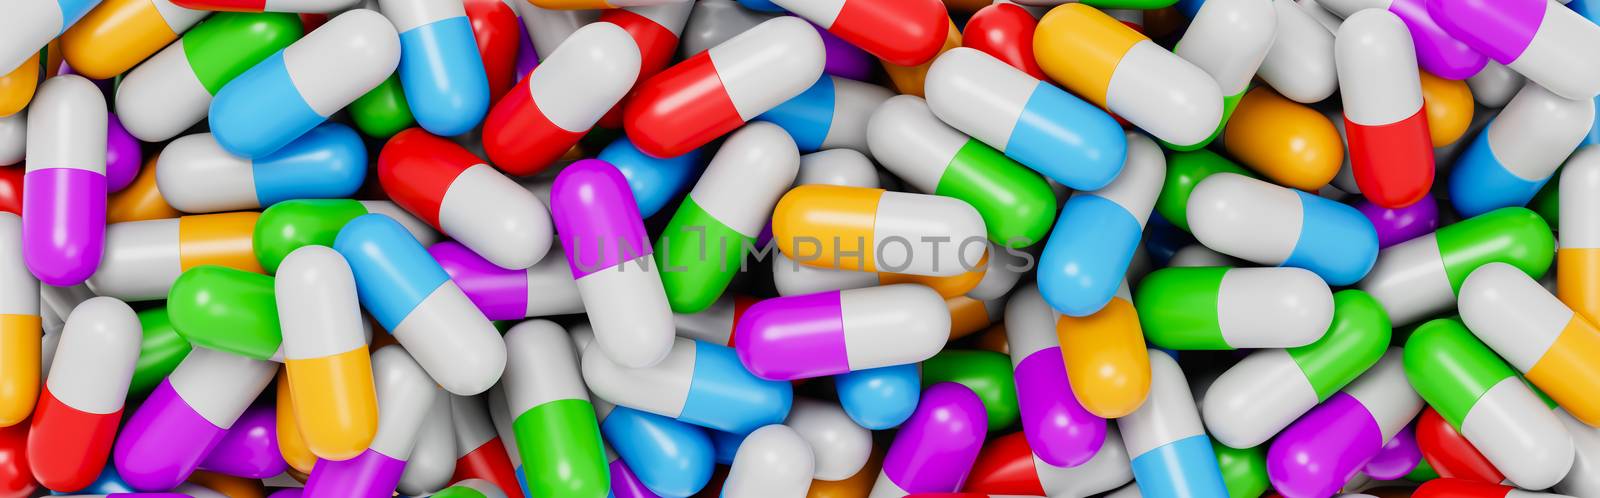 Wall of Many Colorful Pills 3D Illustration